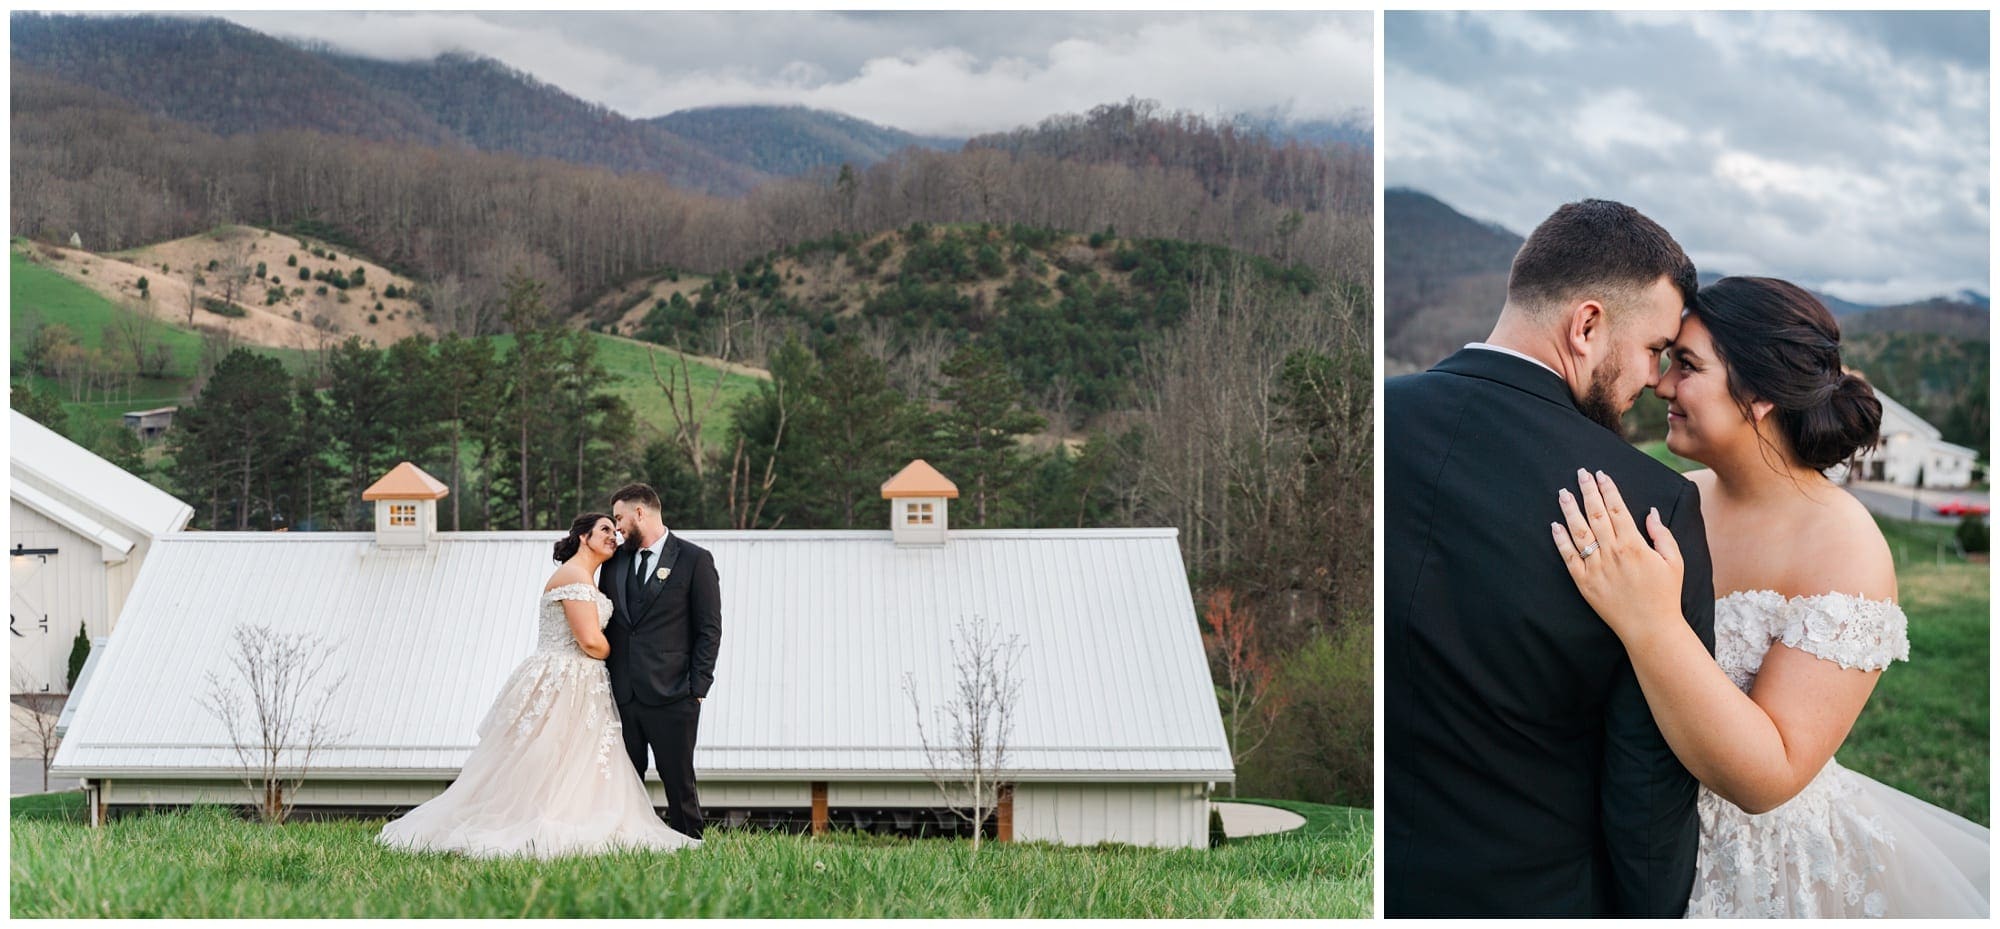 Bride and Groom in field overlooking wedding venue and mountains